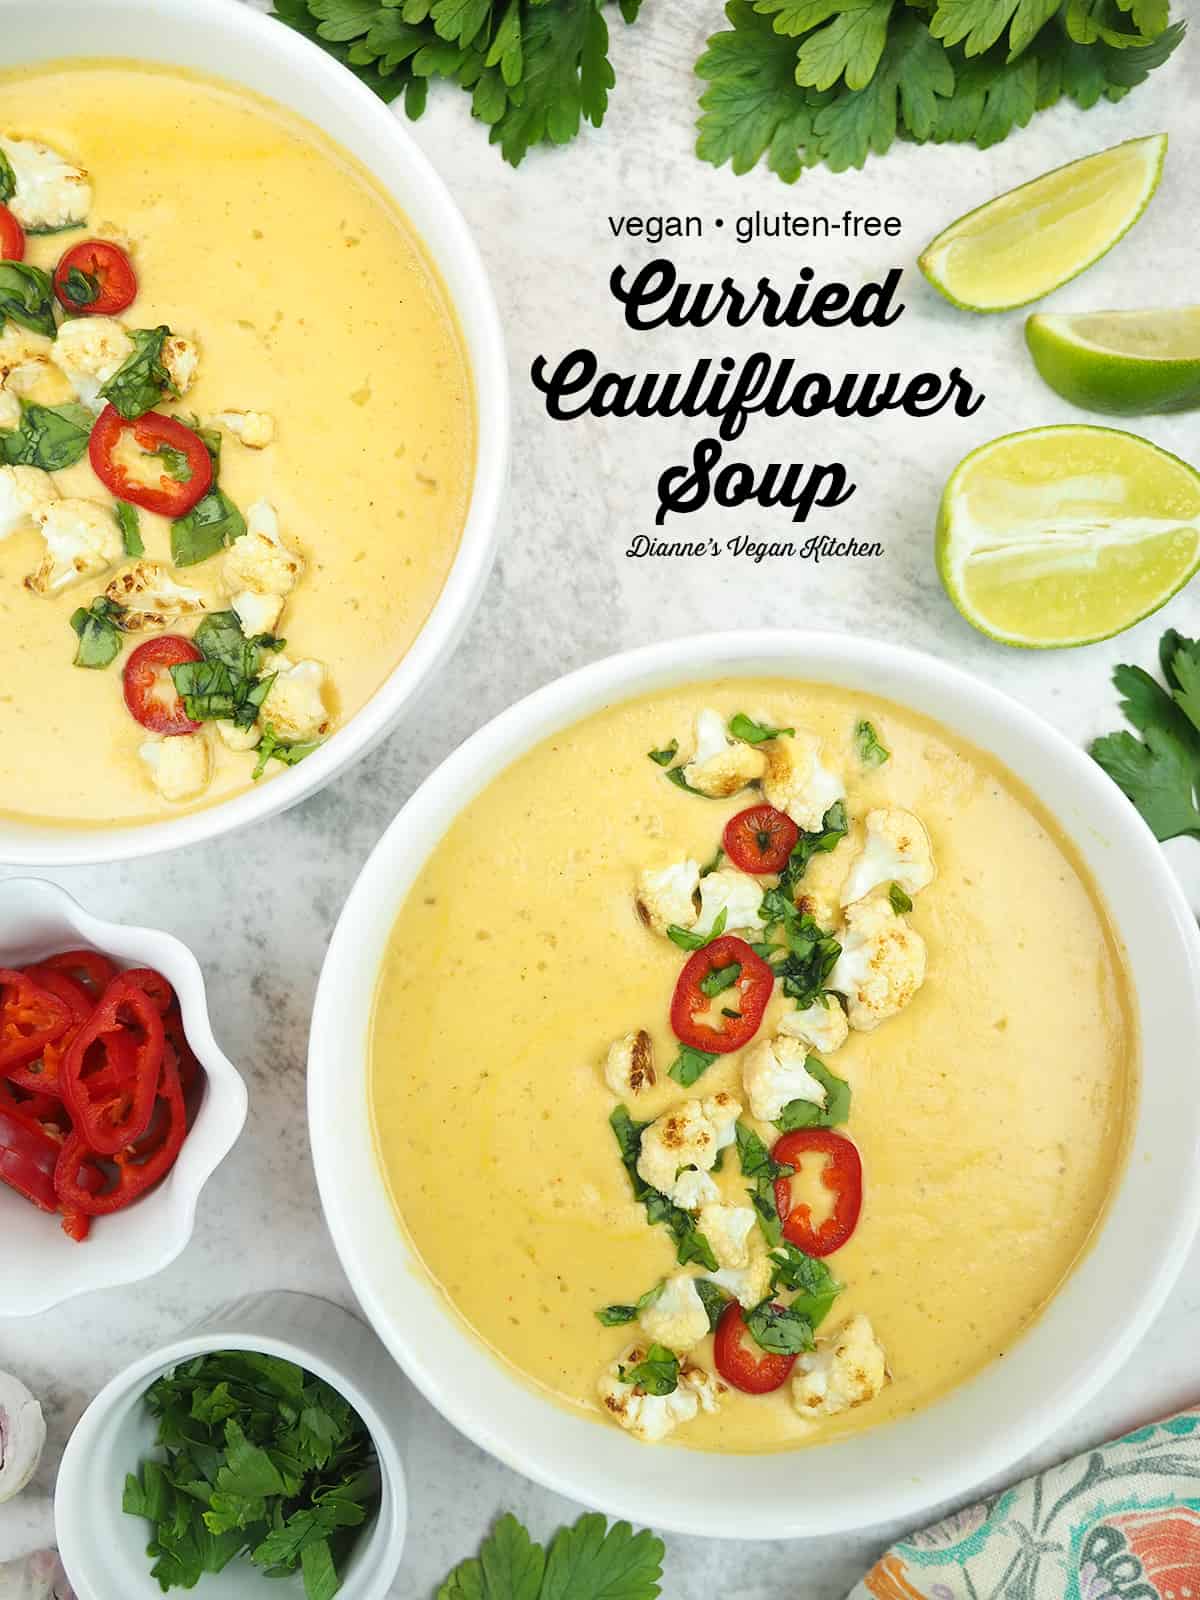 Curried Cauliflower Soup with text overlay 